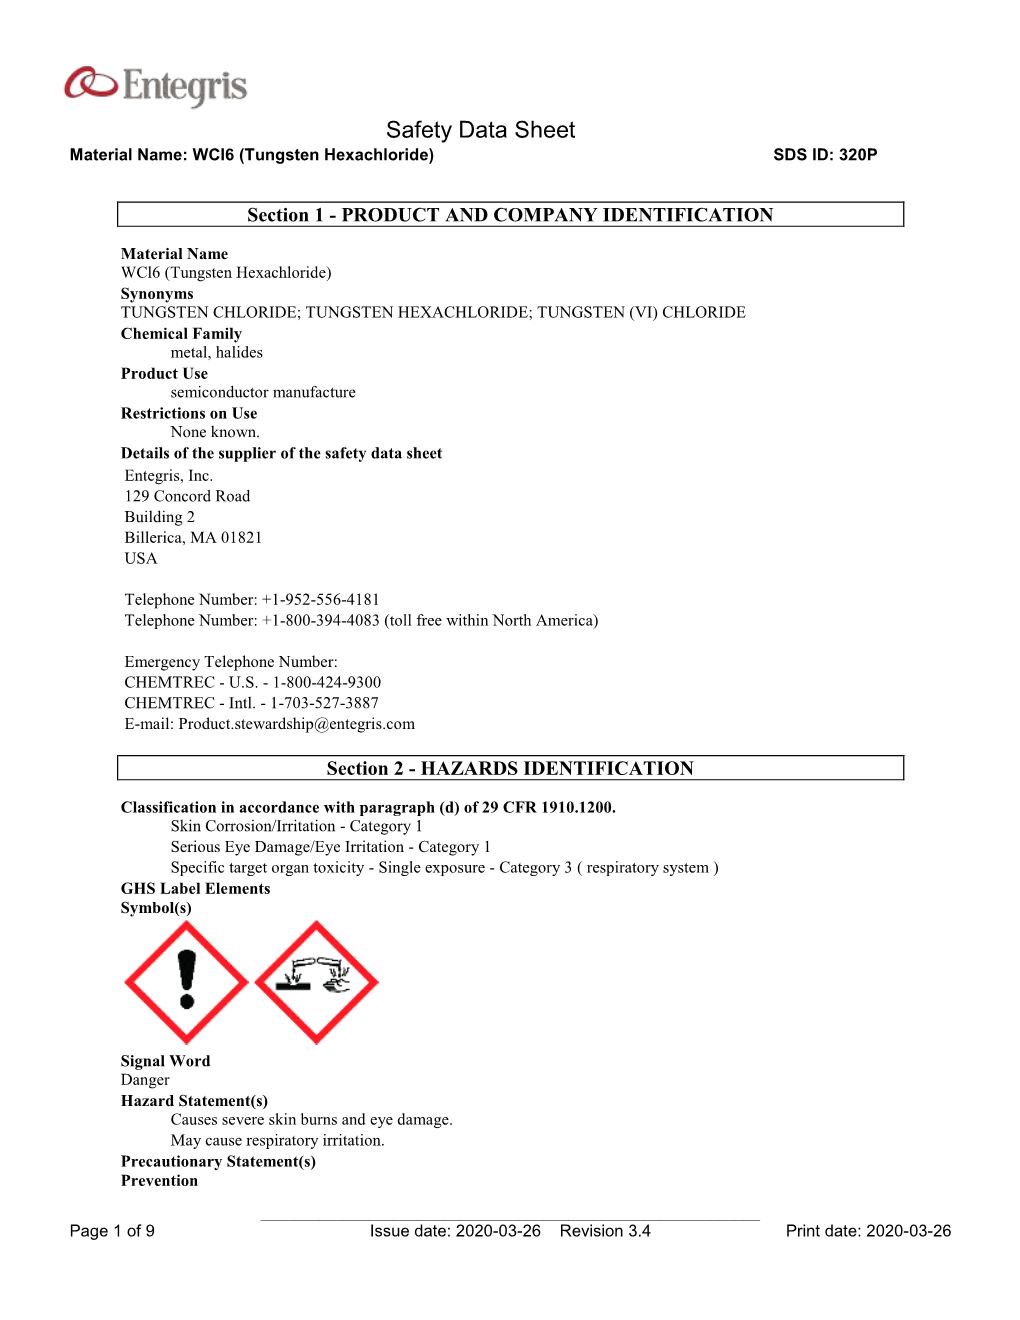 Safety Data Sheet Material Name: Wcl6 (Tungsten Hexachloride) SDS ID: 320P